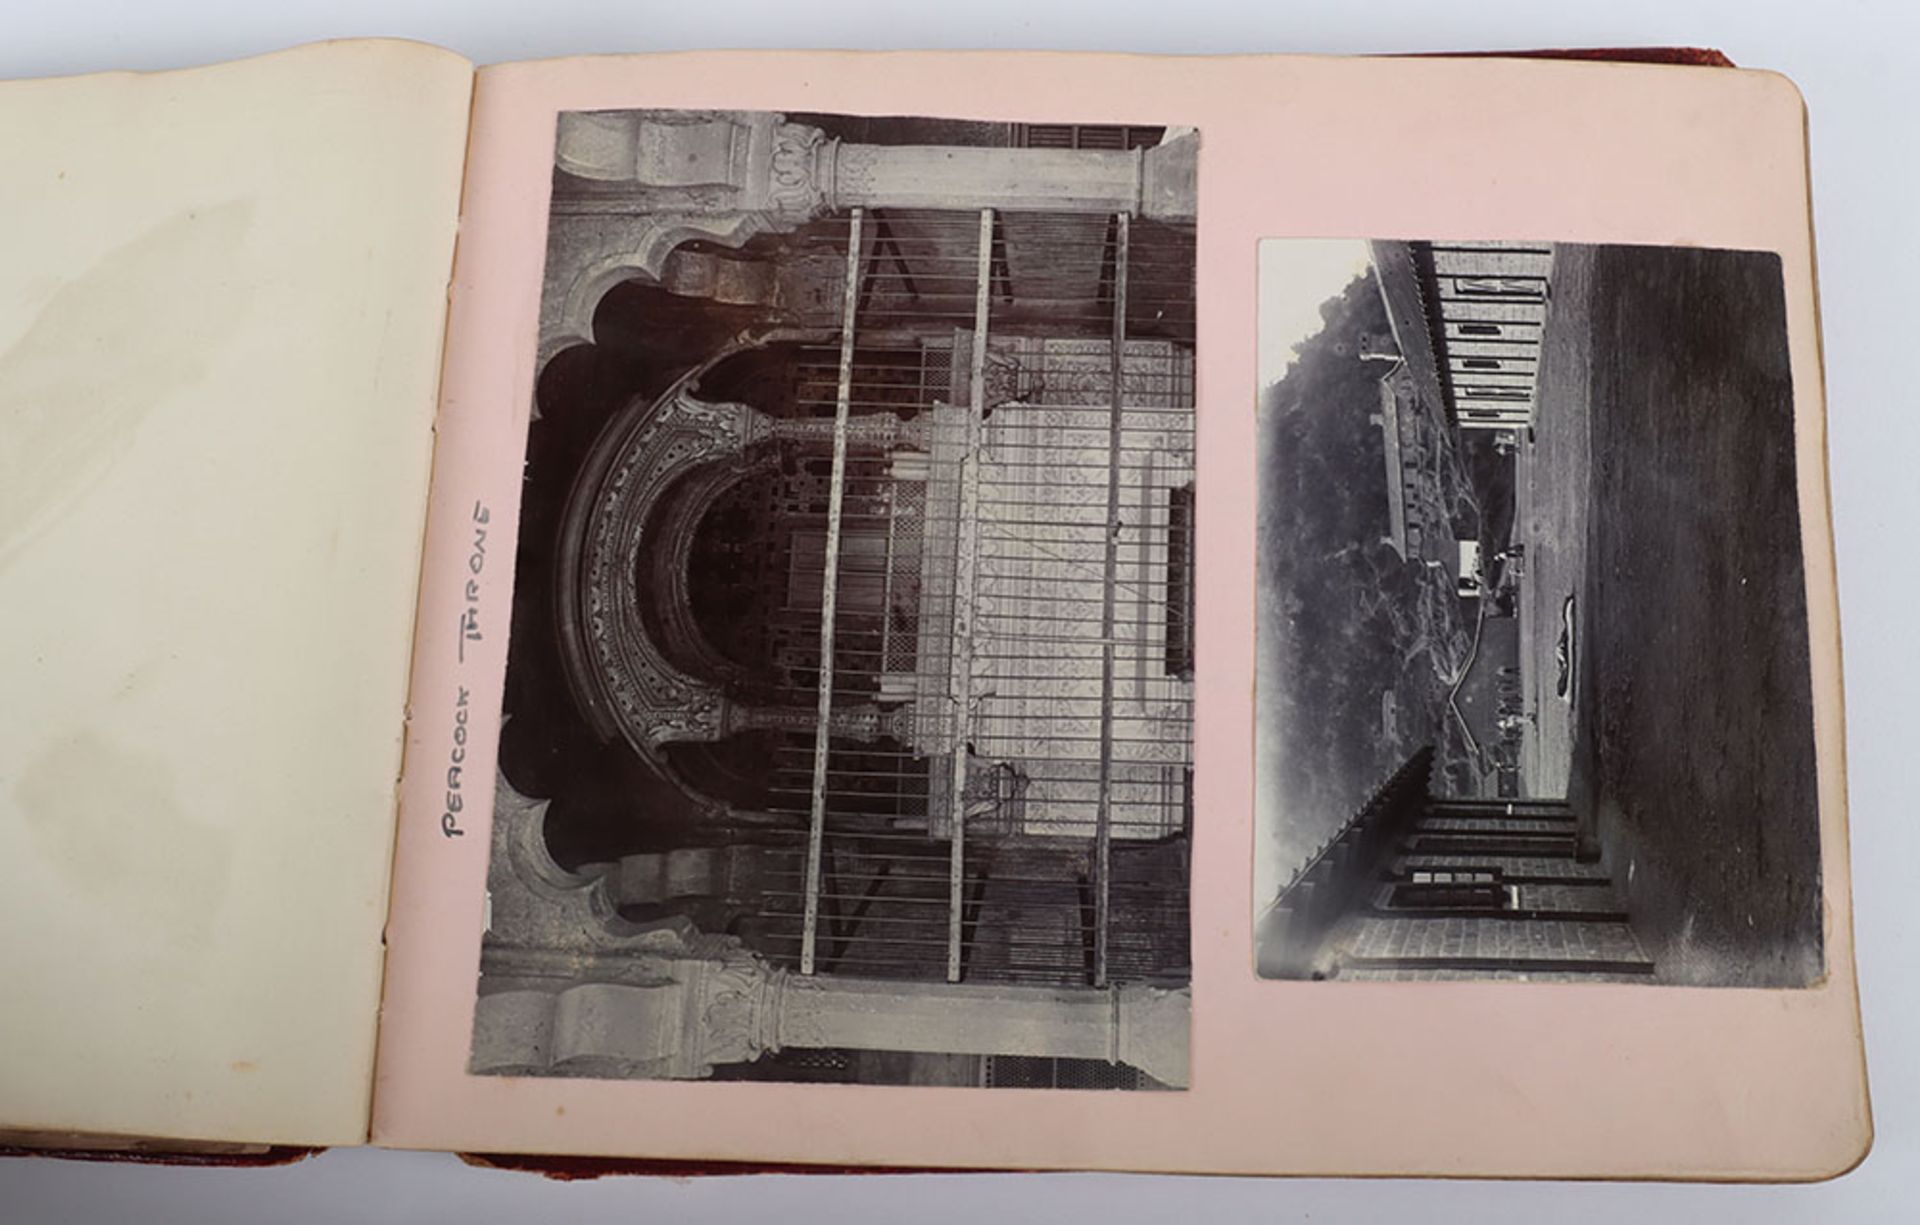 Photograph Album with images of ther Delhi Durbar, troops lining streets, Elephants, sacred cows bel - Image 23 of 48